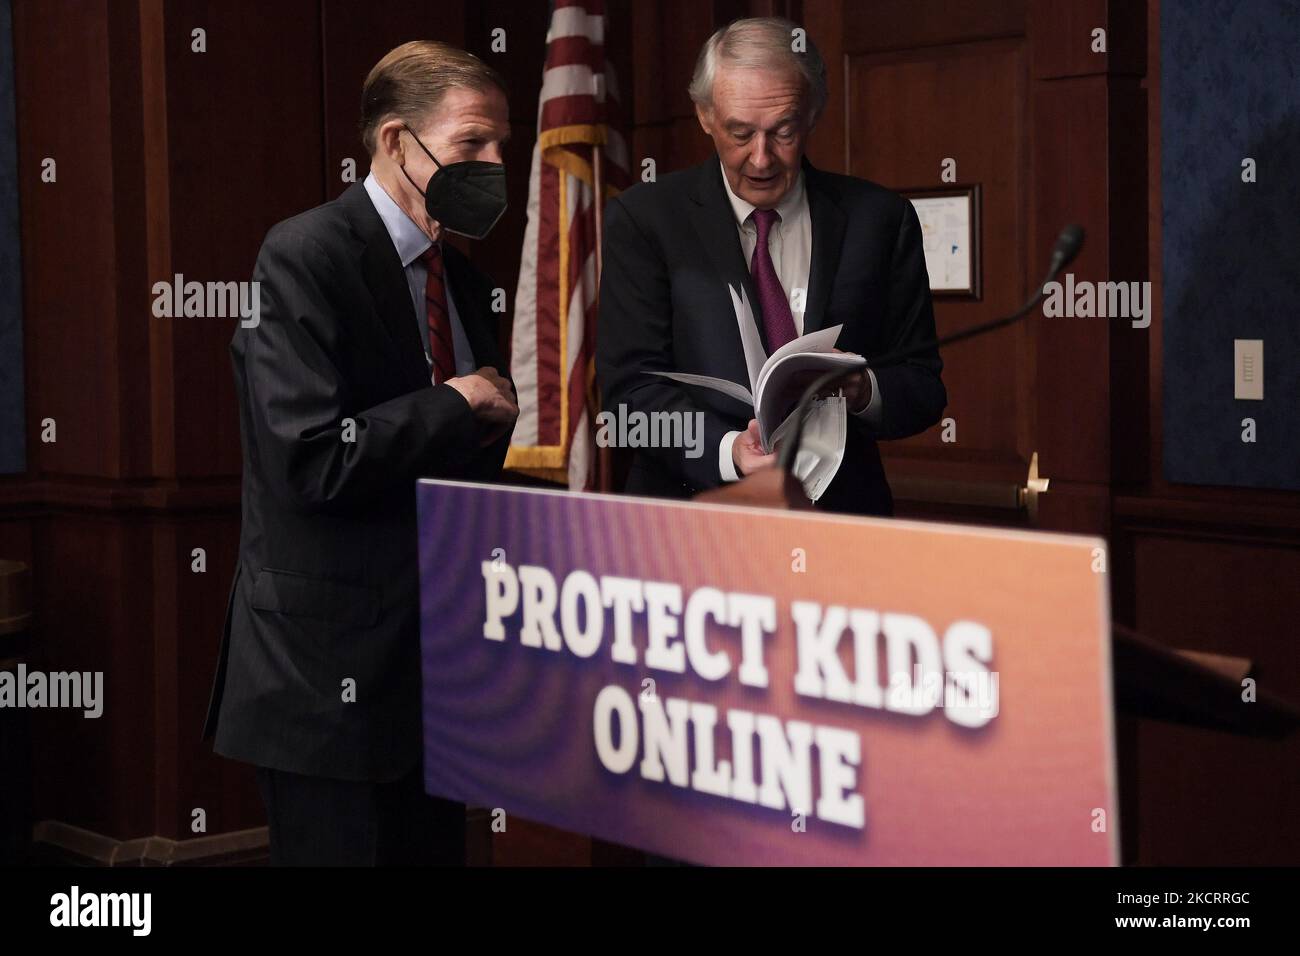 US Senators Ed Markey(D-MA)(right) and Richard Blumenthal(D-CT)(left) during a press conference about Online Privacy Protection Act, today on October 27, 2021 at SVC/Capitol Hill in Washington DC, USA. (Photo by Lenin Nolly/NurPhoto) Stock Photo